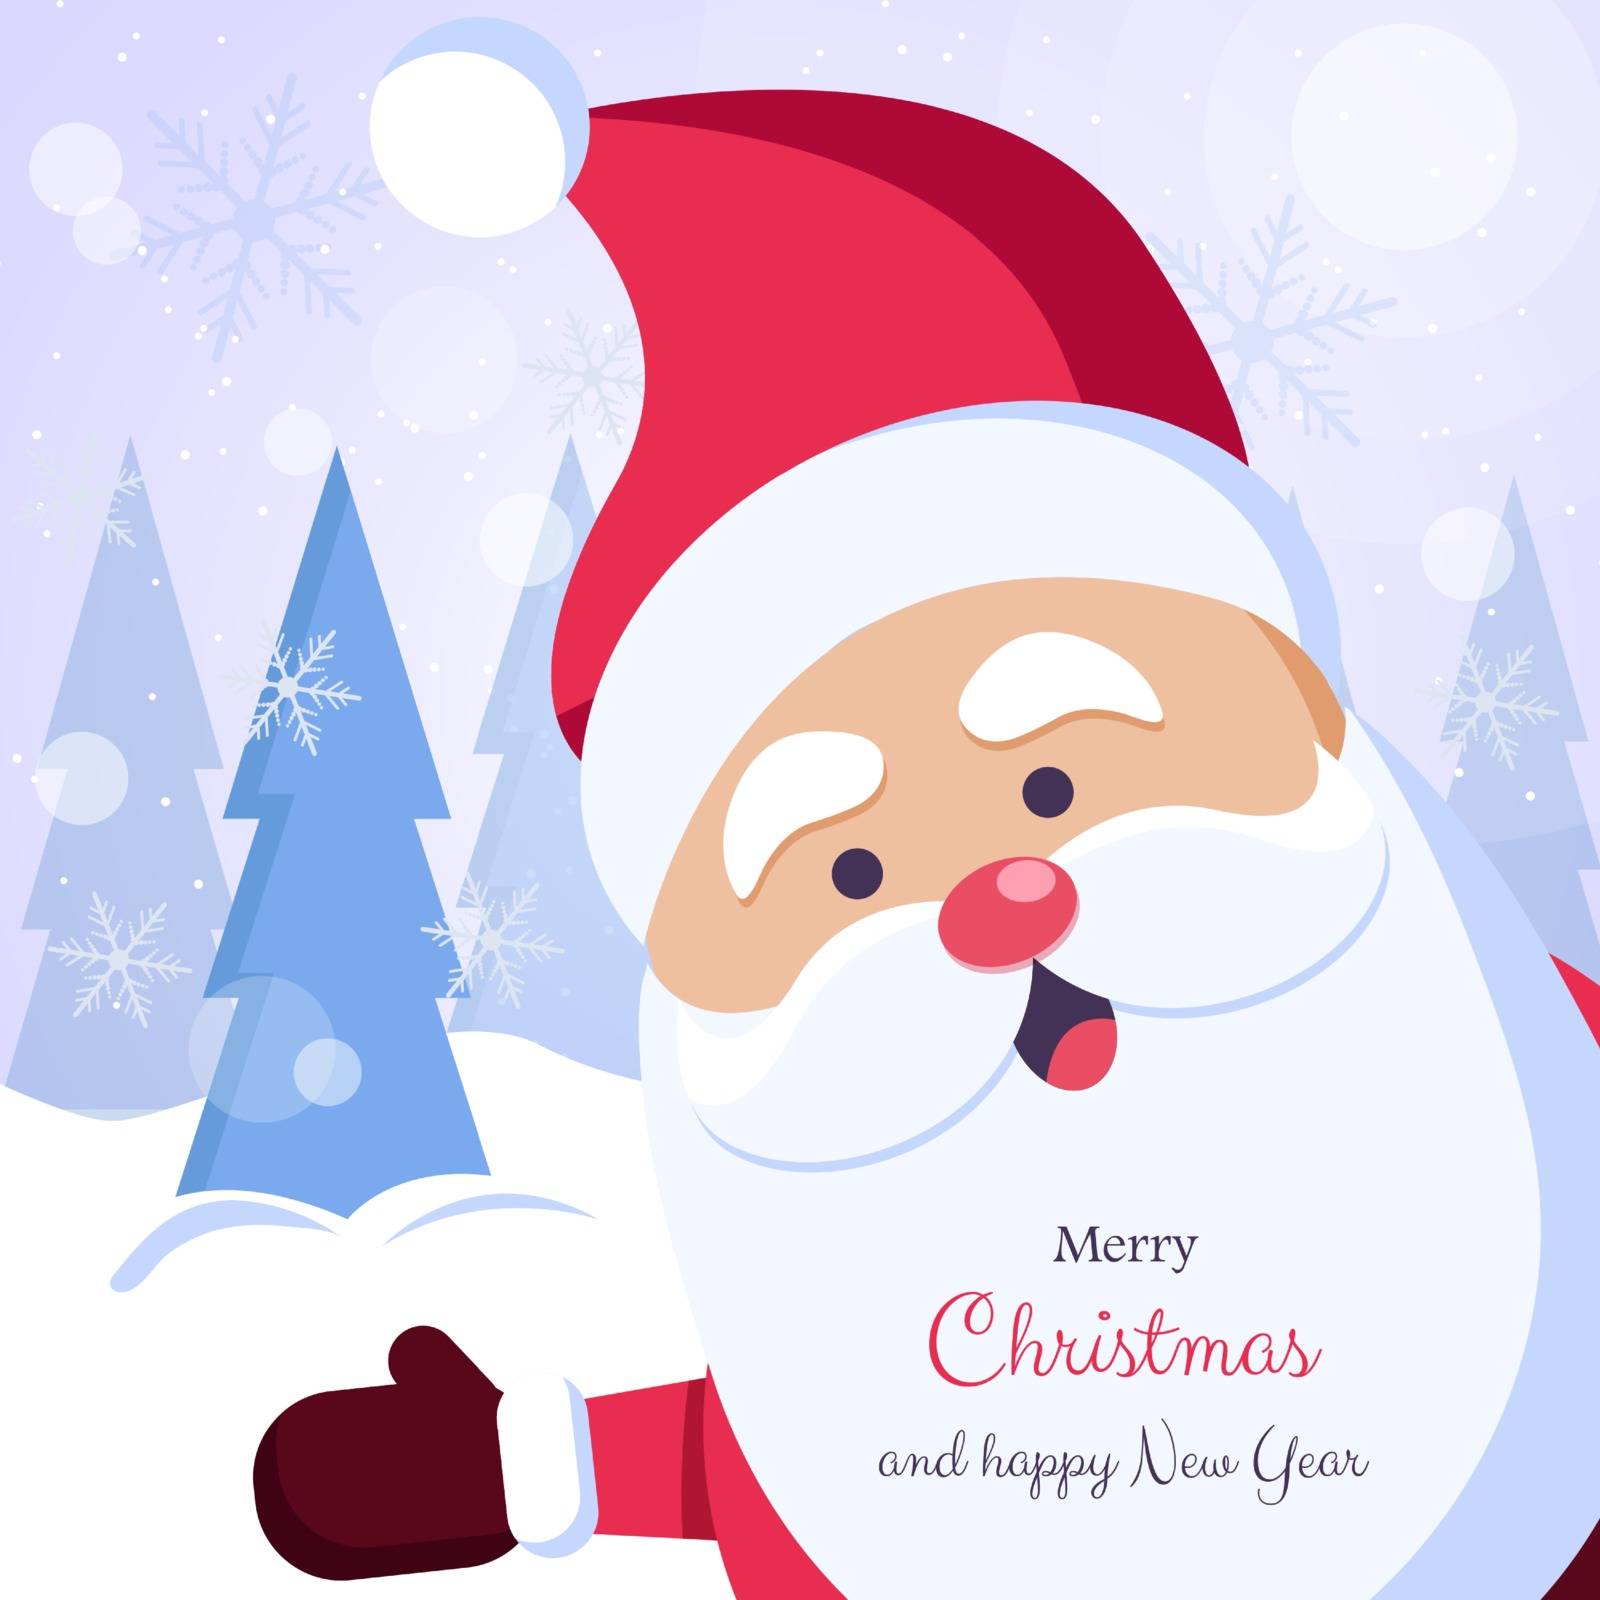 We Wish you a Merry Christmas. Happy new year. Santa Claus character with big signboard. Holiday greeting card with Christmas snow. Isolated vector illustration